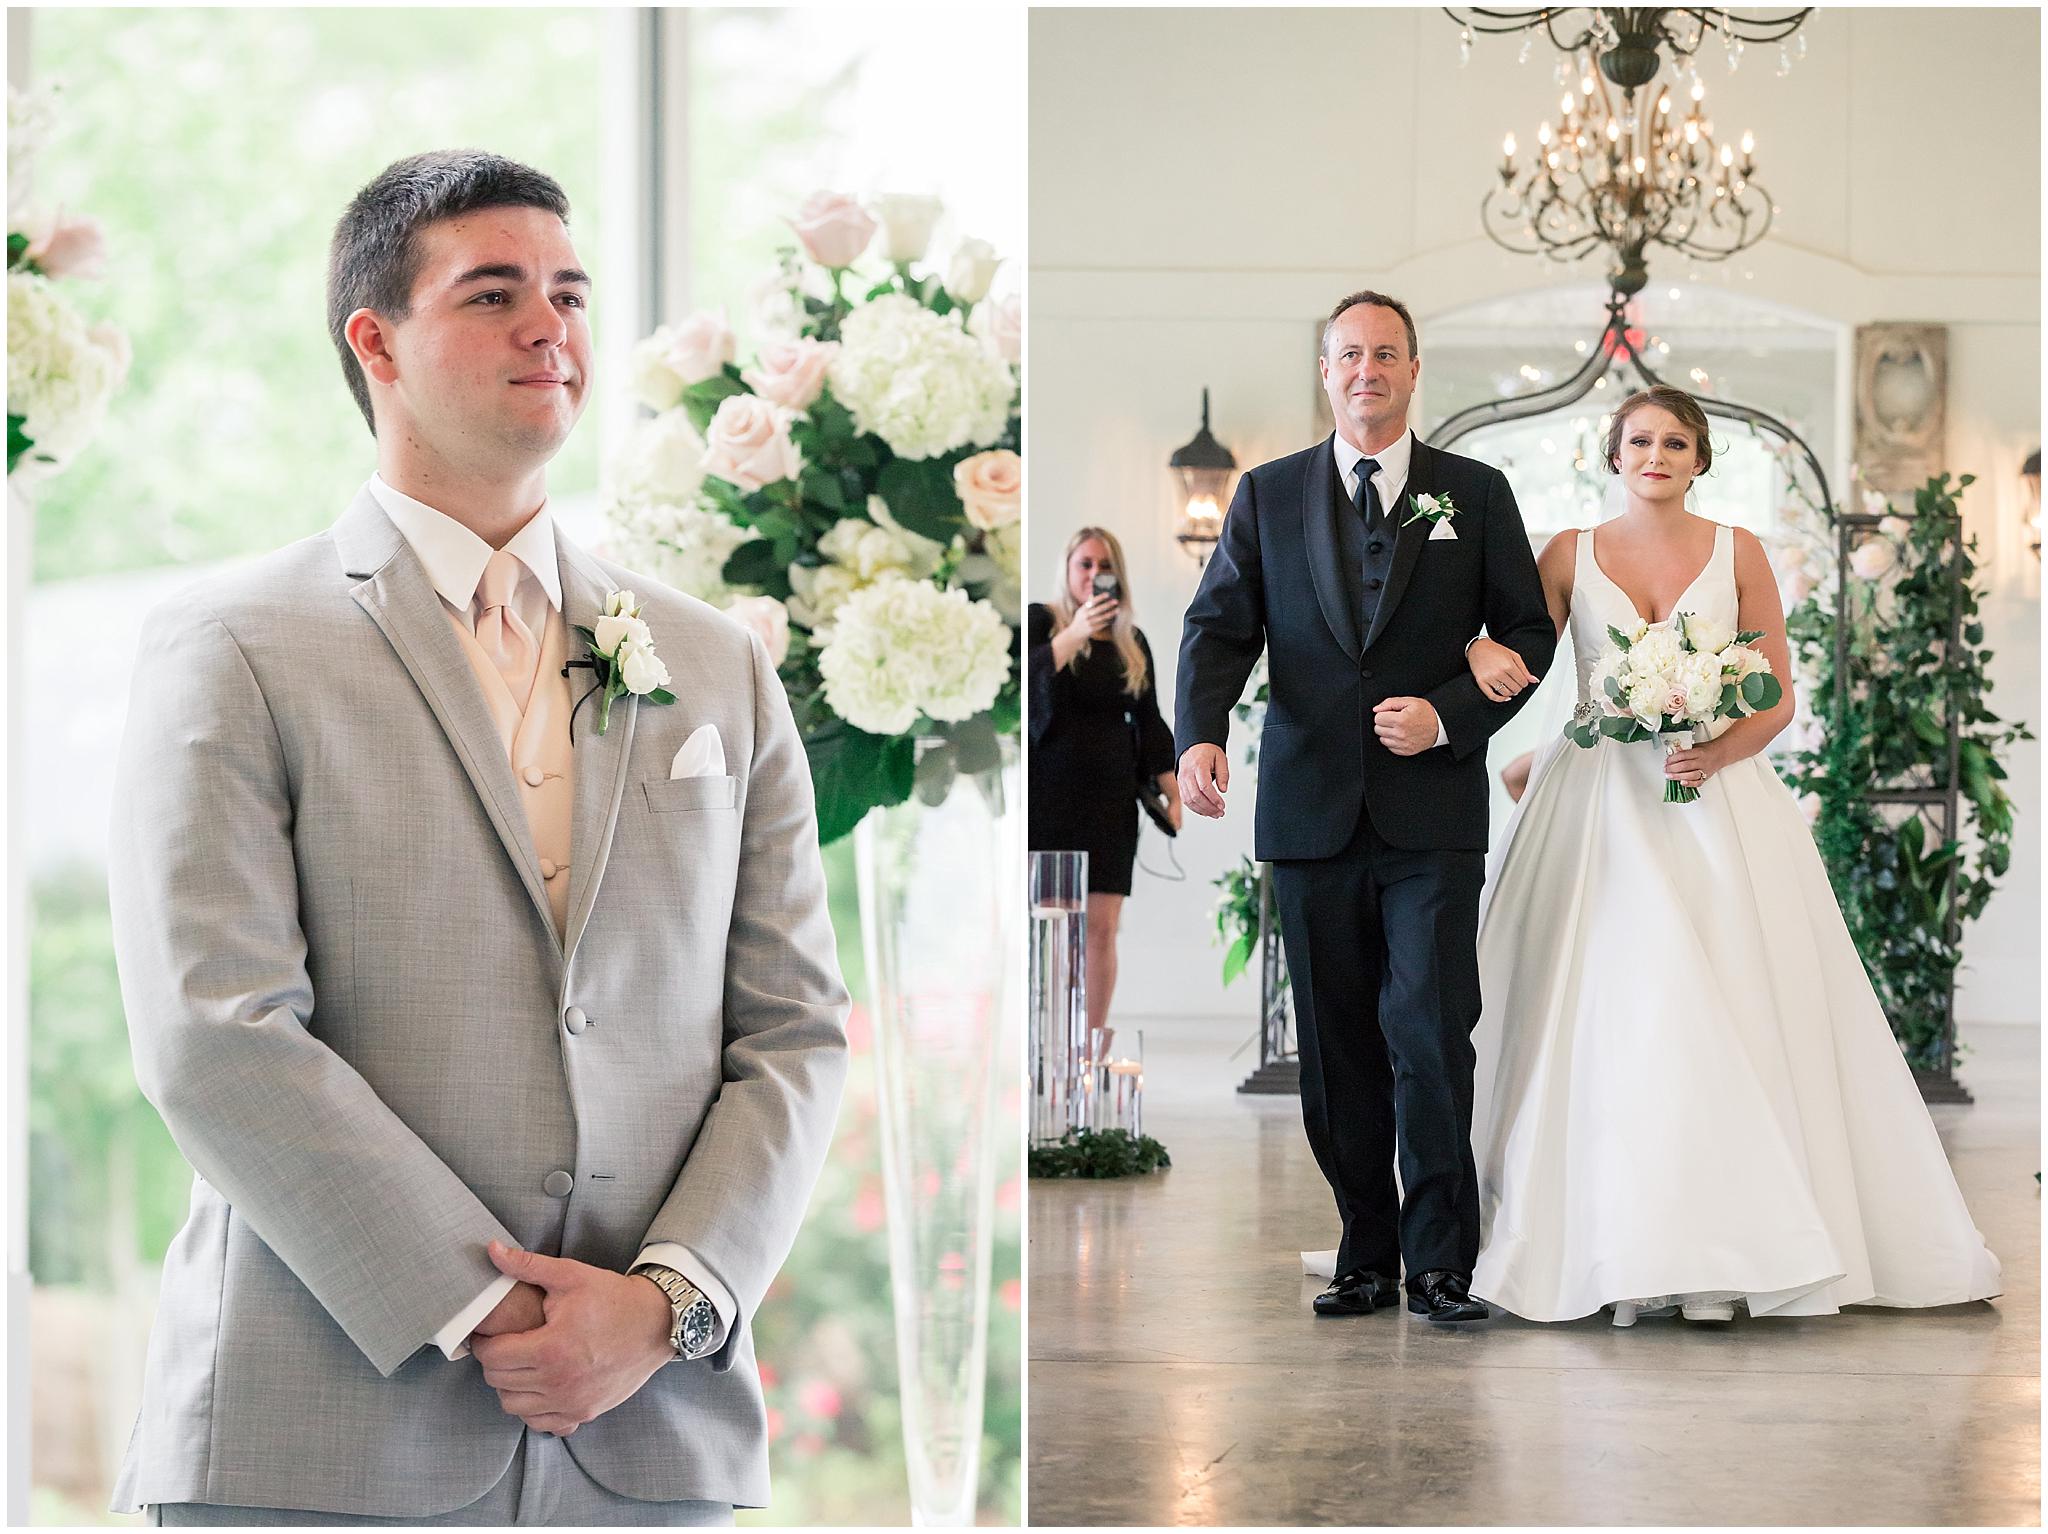 Tate House Wedding Ceremony Pictures